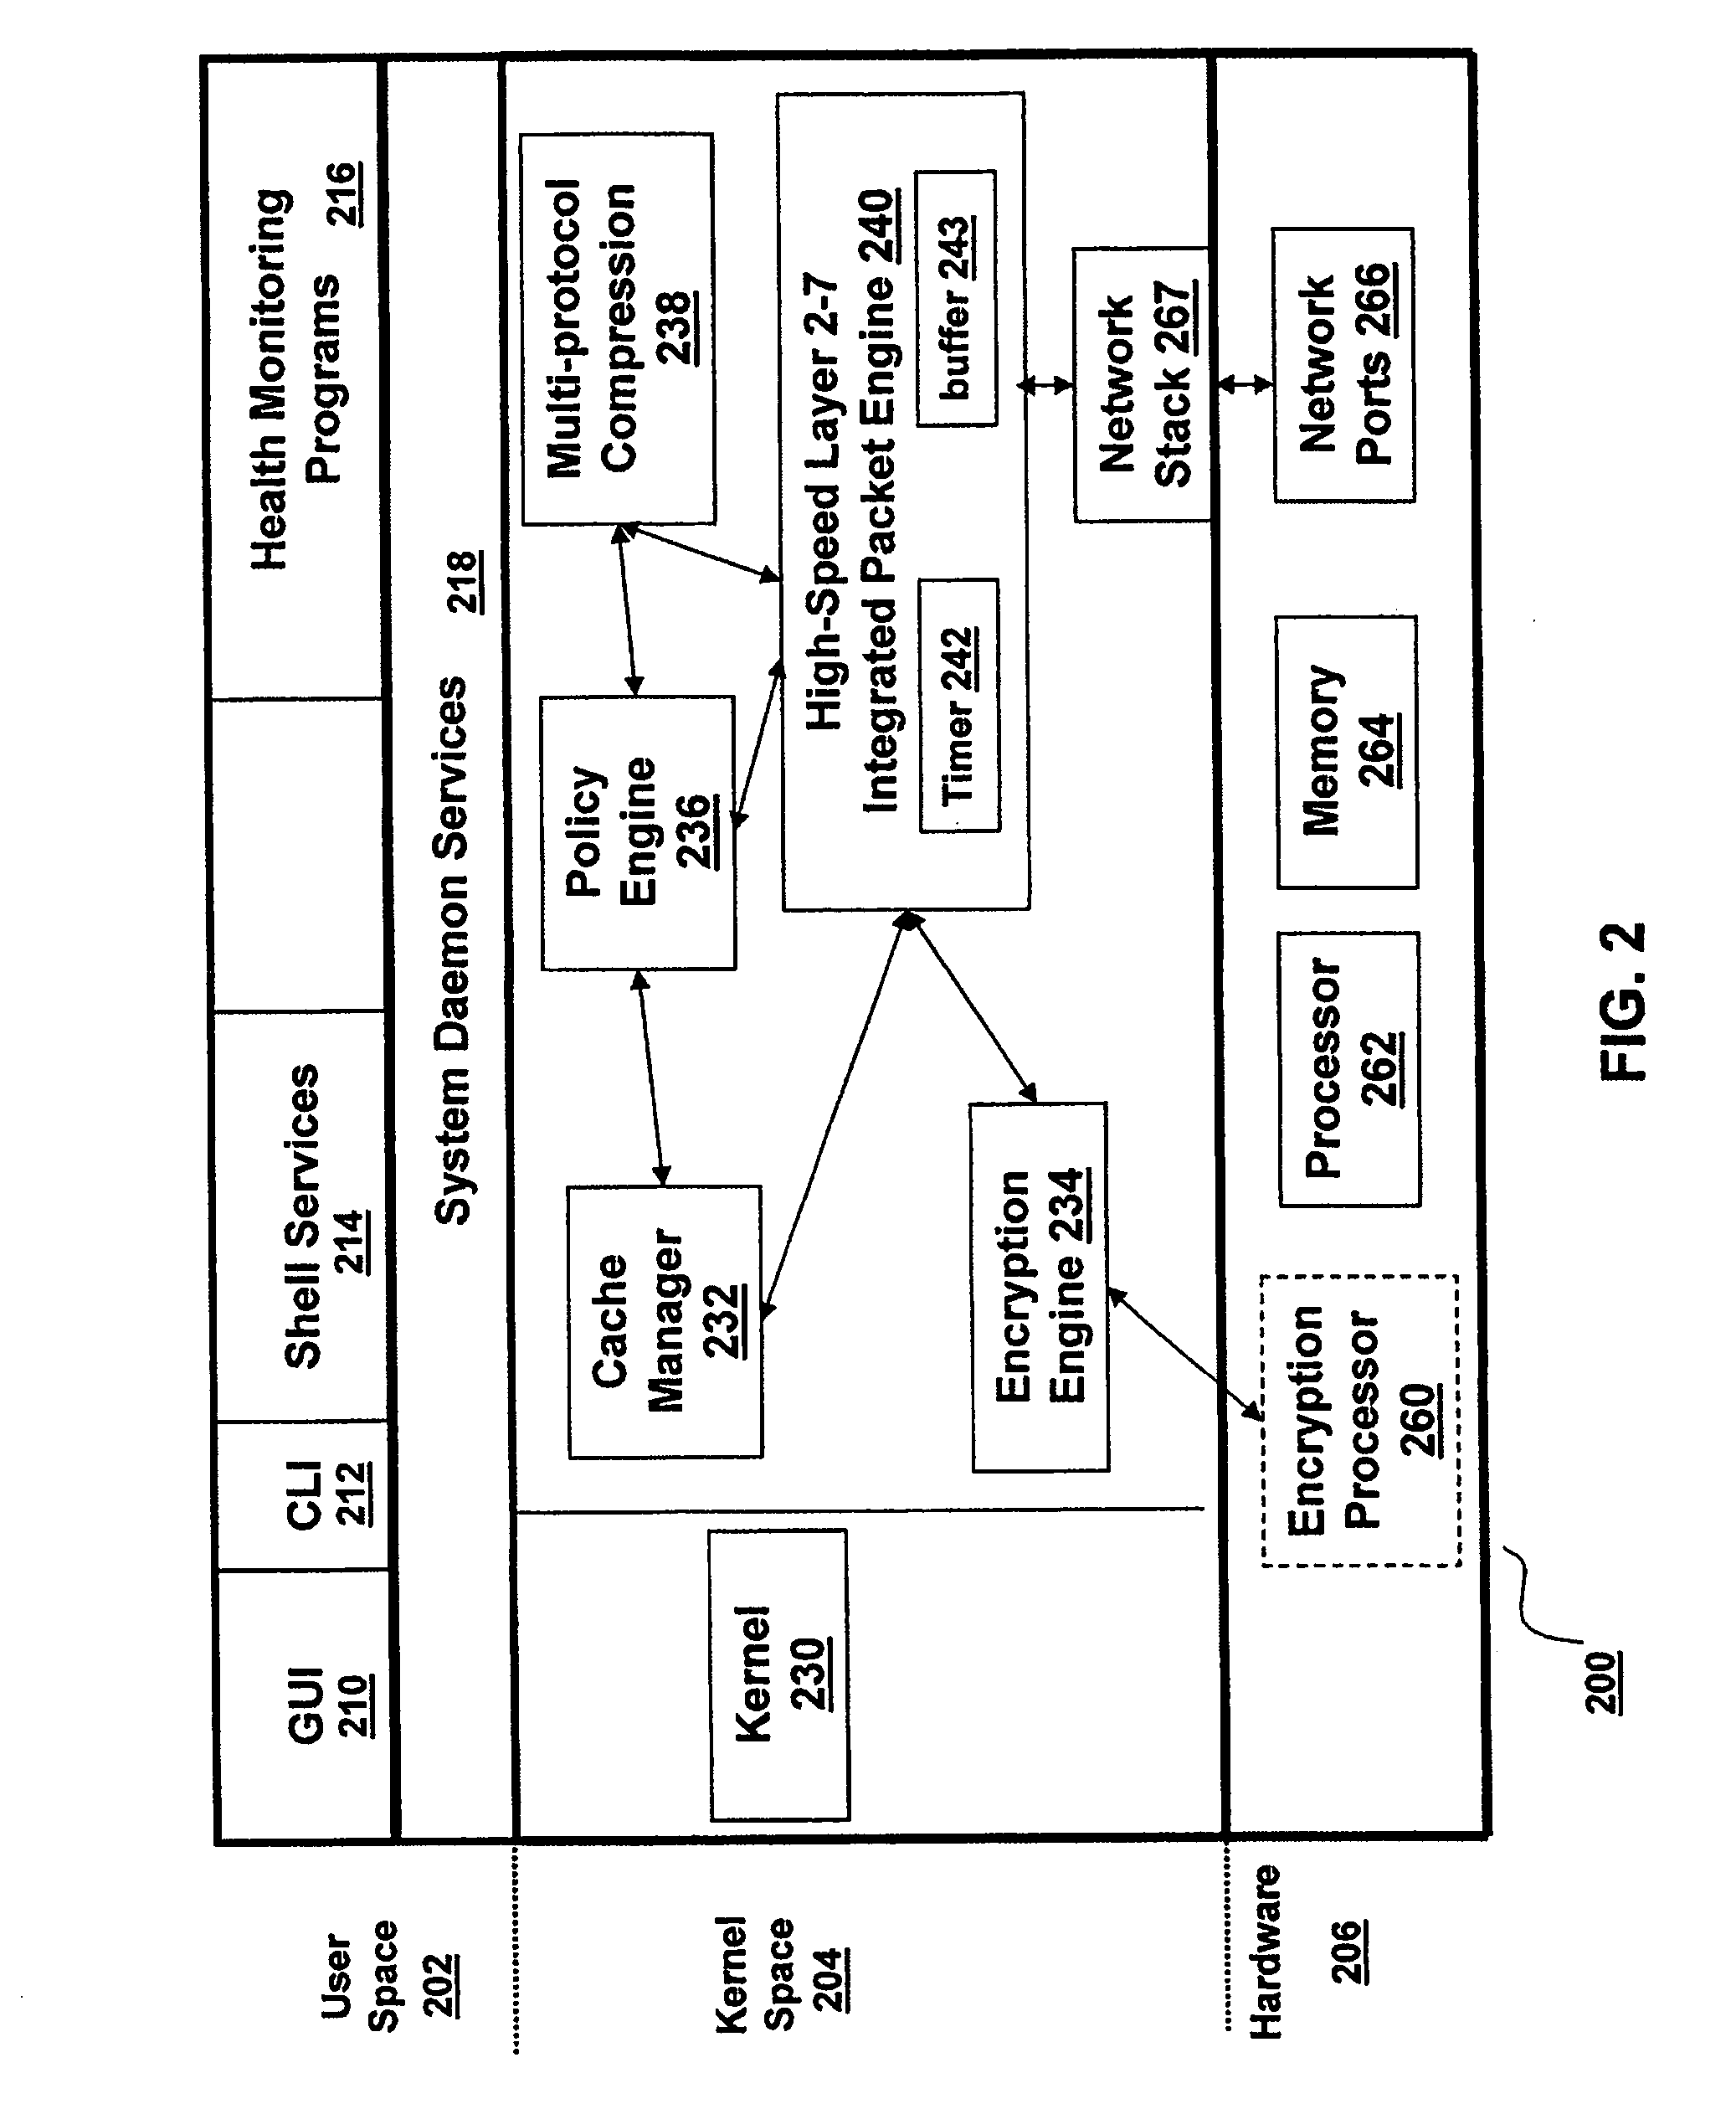 System and method for performing flash crowd caching of dynamically generated objects in a data communication network